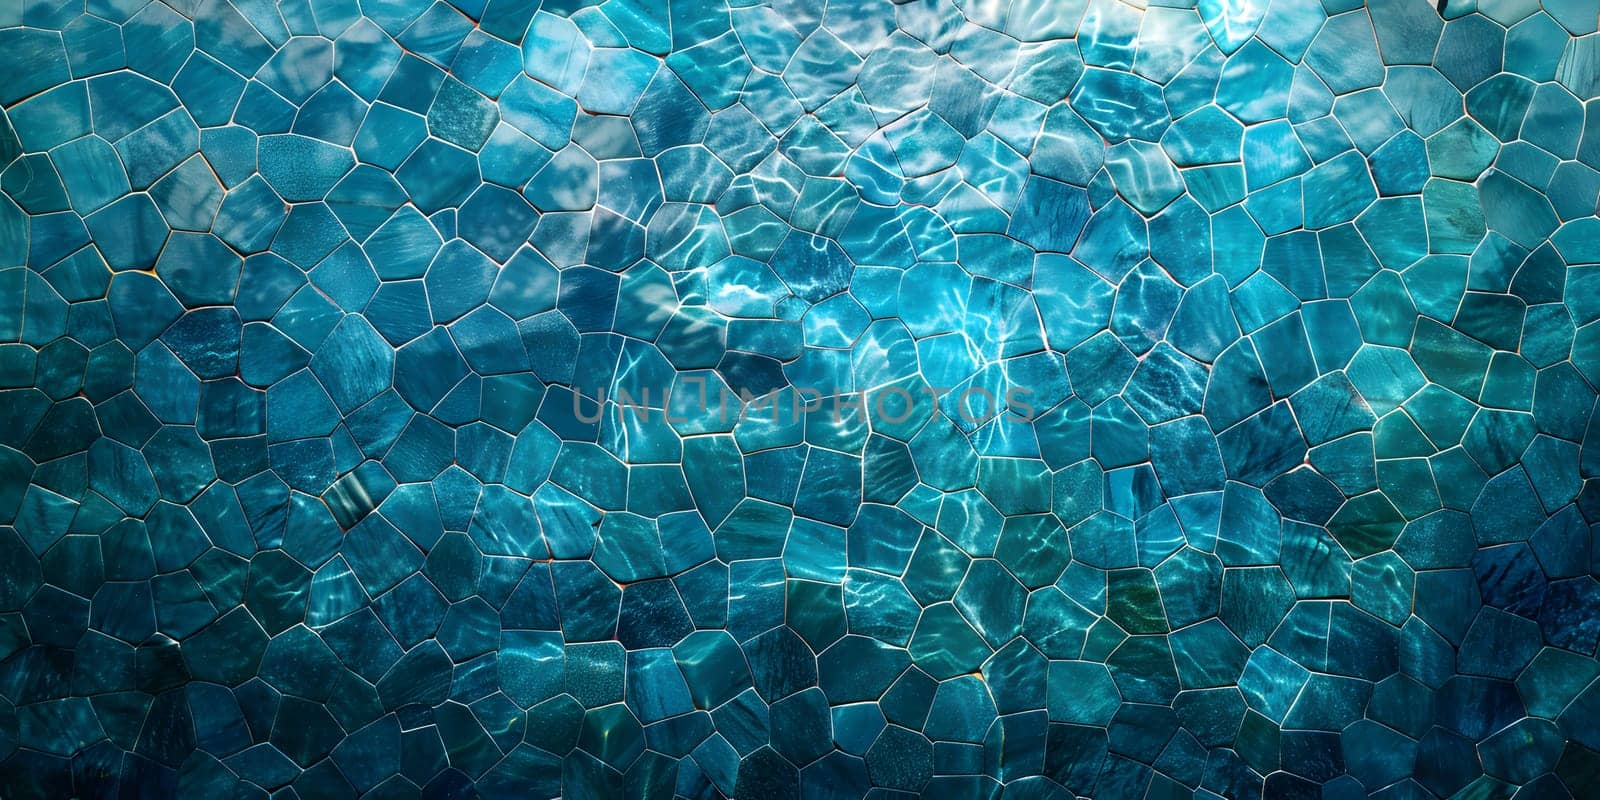 a close up of the water in a swimming pool by Nadtochiy